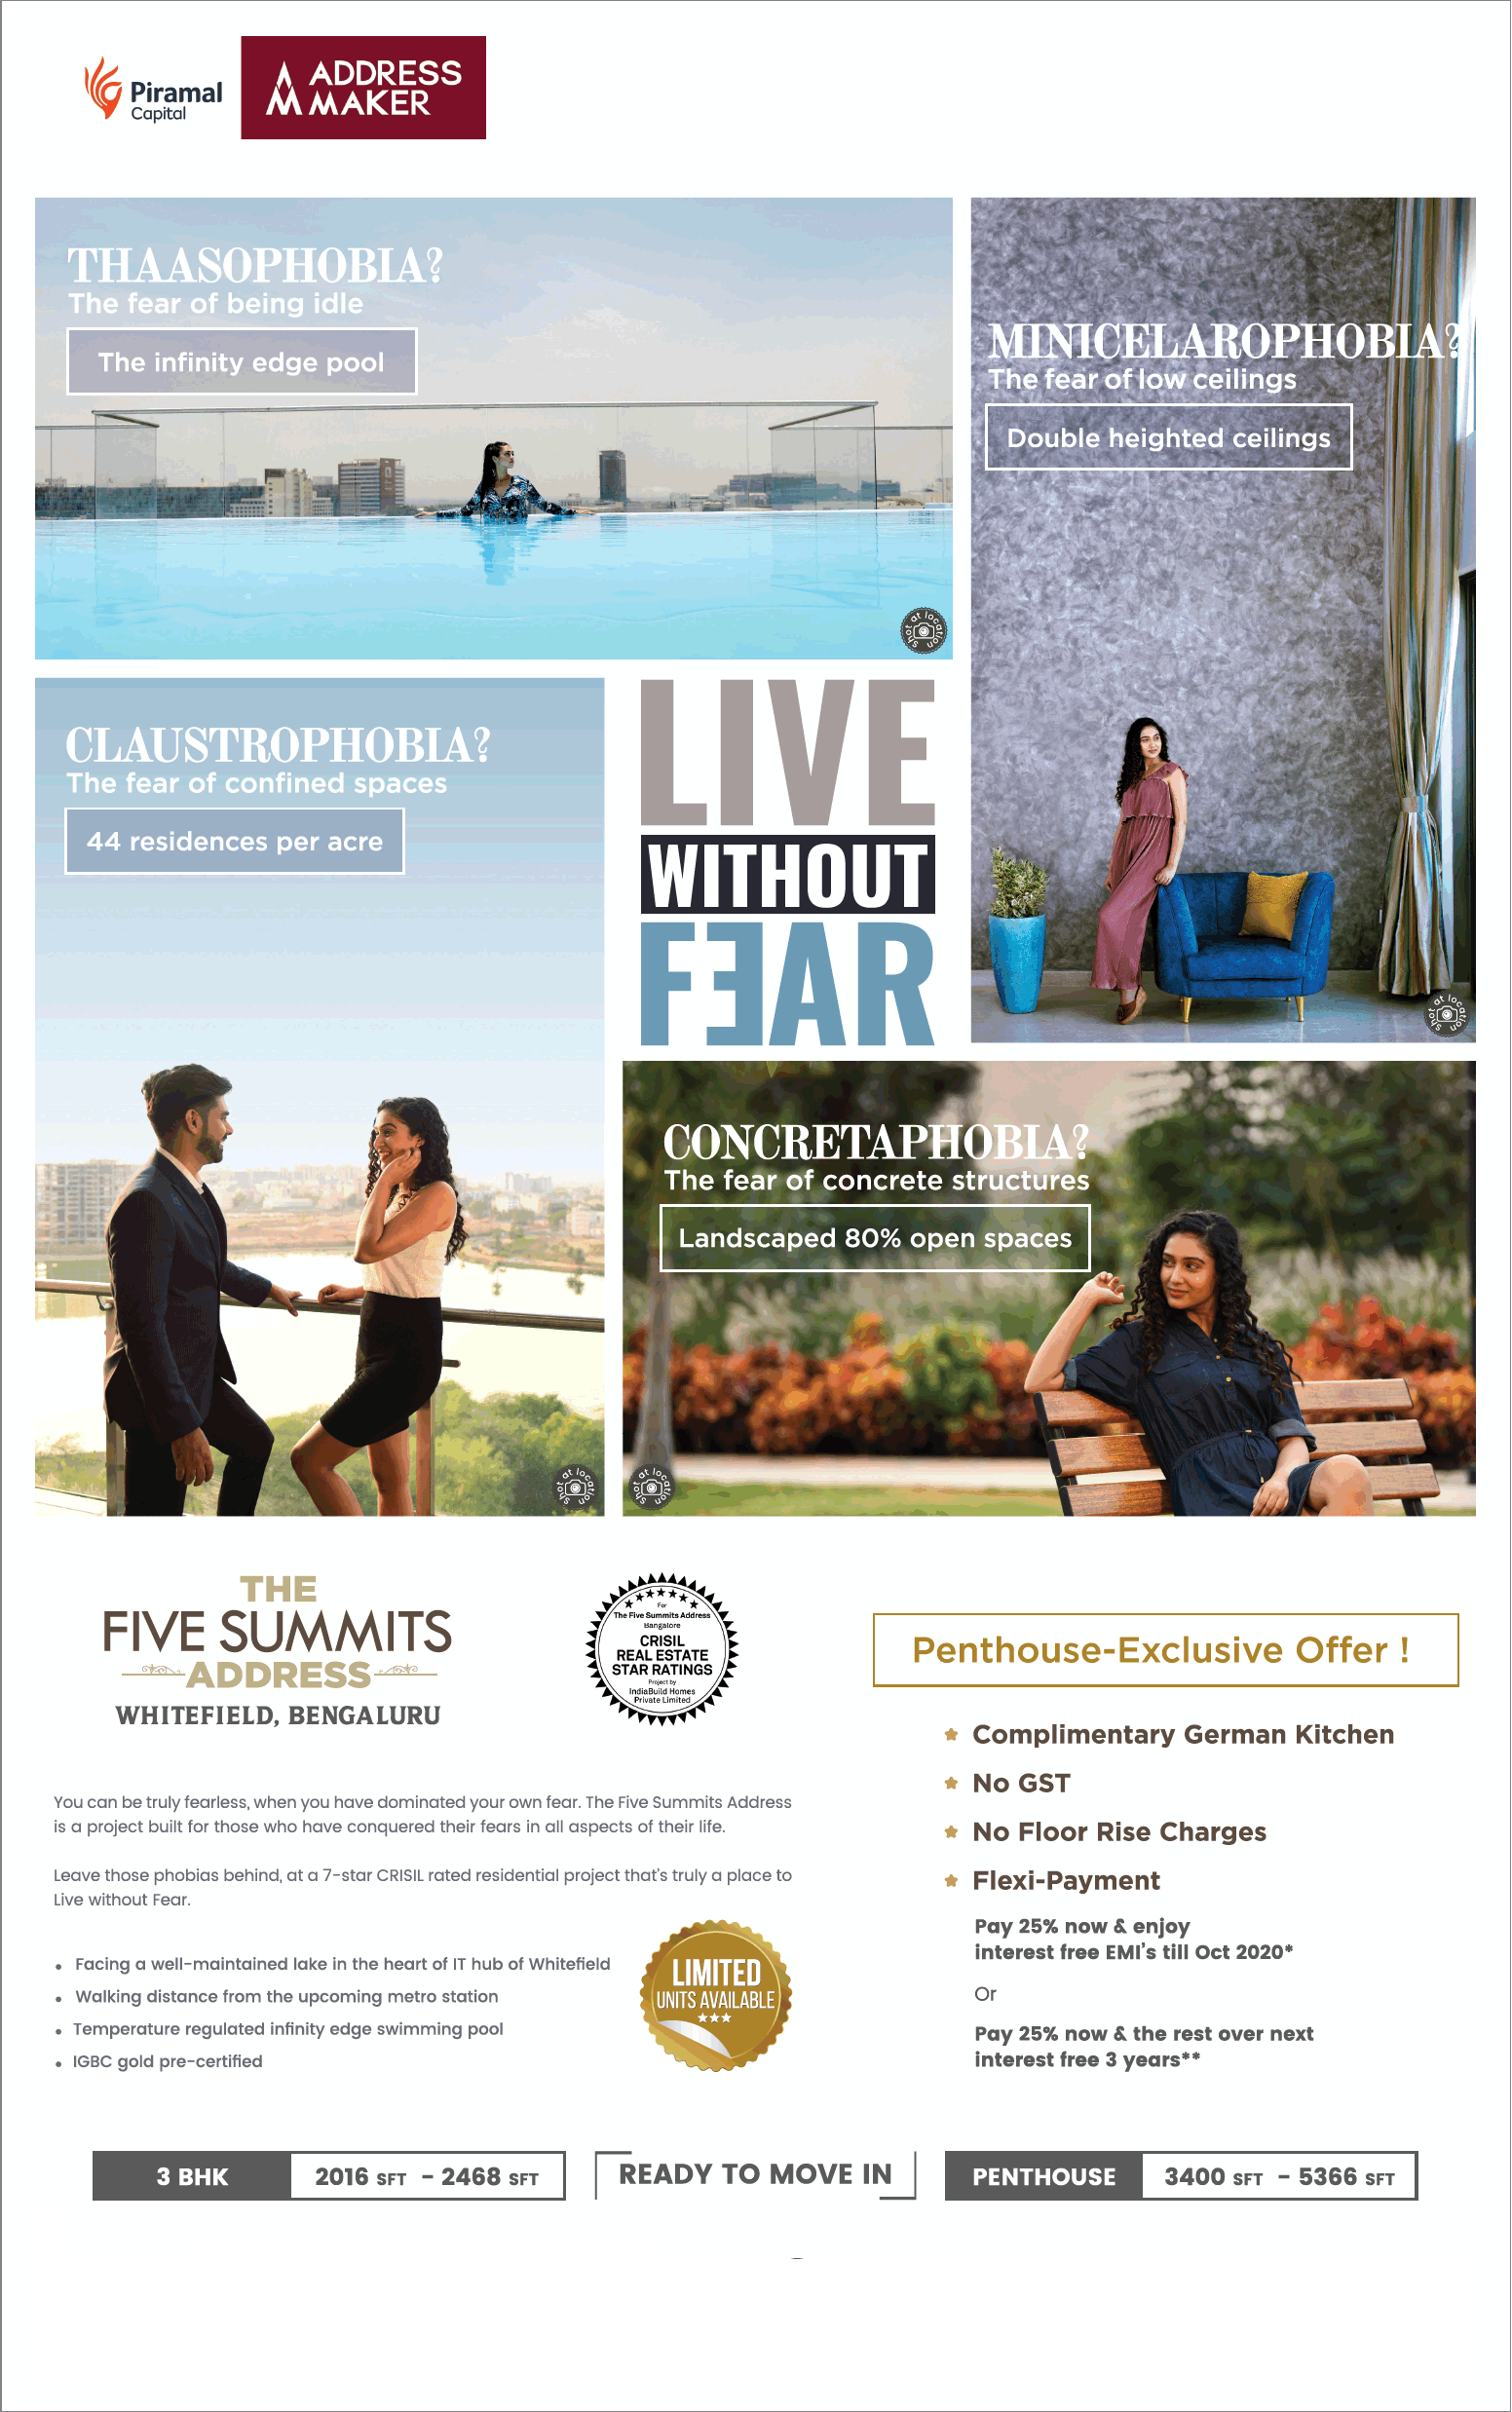 Book 3 BHK apartments and penthouse on exclusive offer at The Five Summits Address, Bangalore